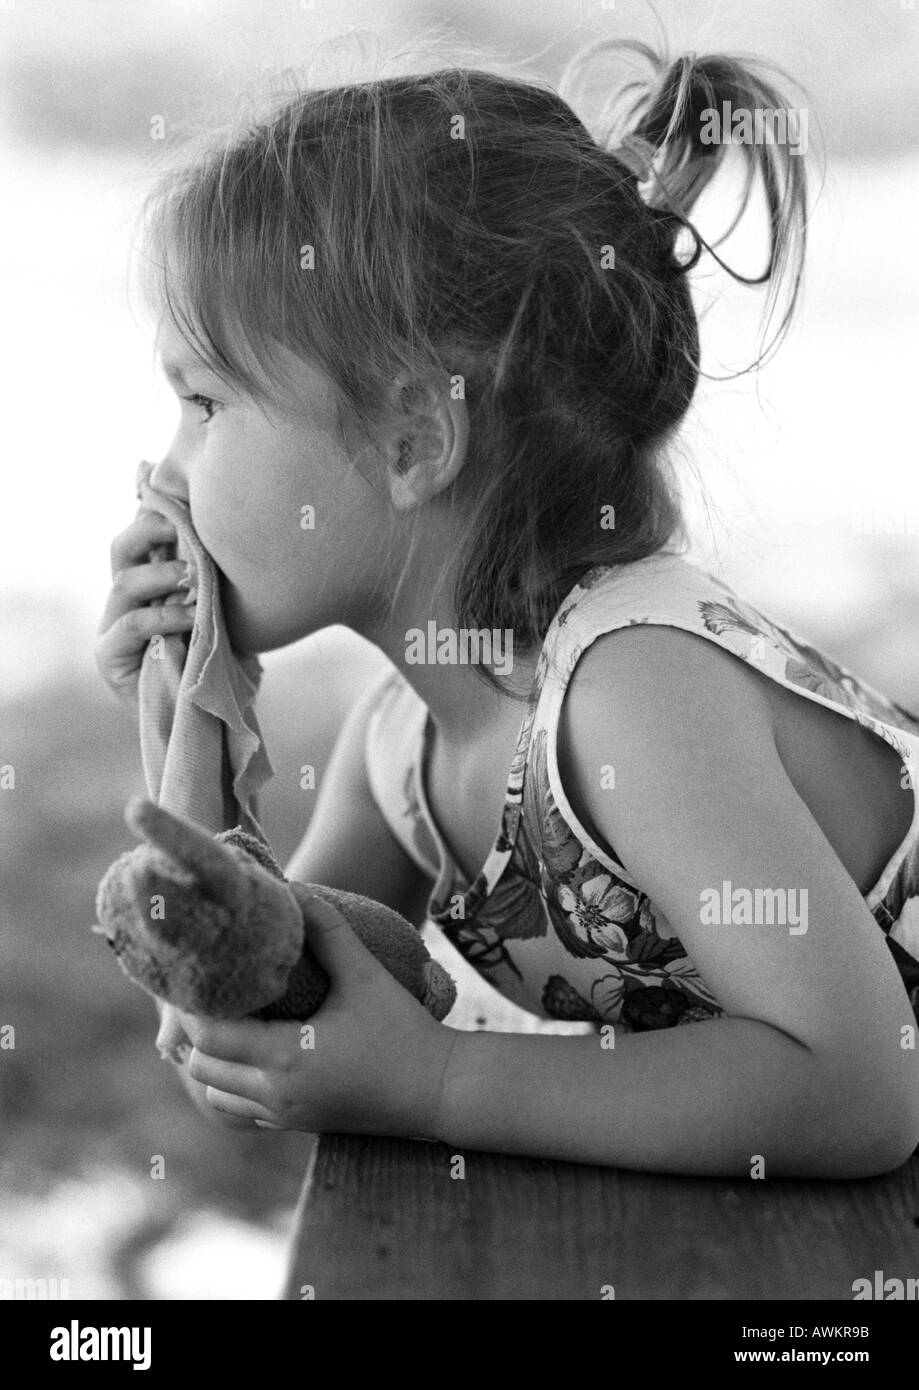 Girl holding stuffed animal in hand and piece of fabric over mouth, side view, b&w Stock Photo